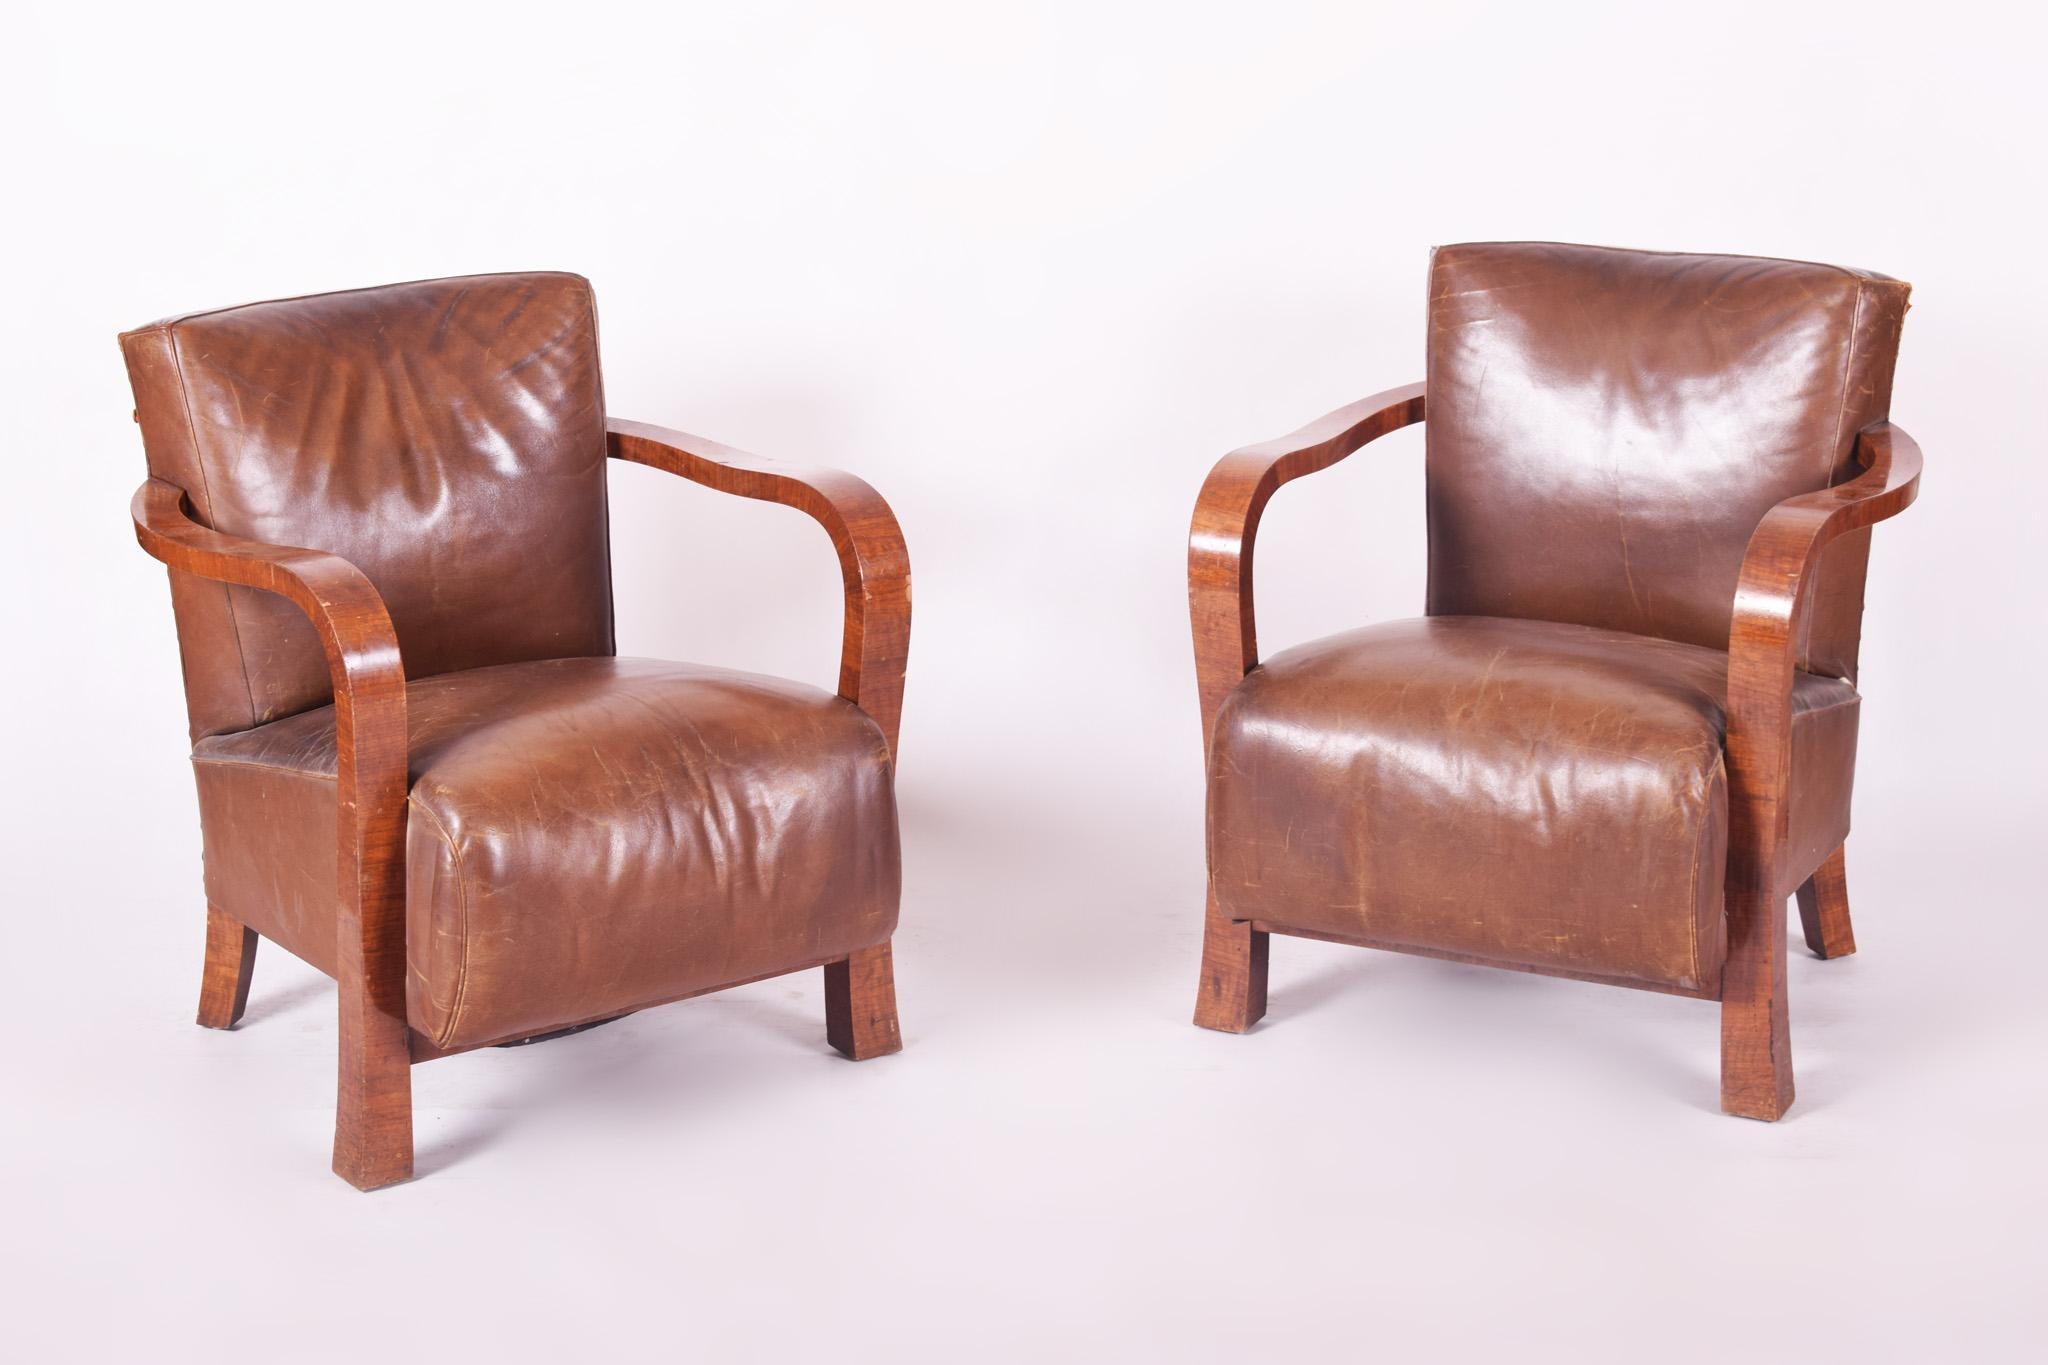 Brown Walnut Art Deco Three-Piece Suite, Preserved Condition and Leather, 1930s In Good Condition For Sale In Horomerice, CZ